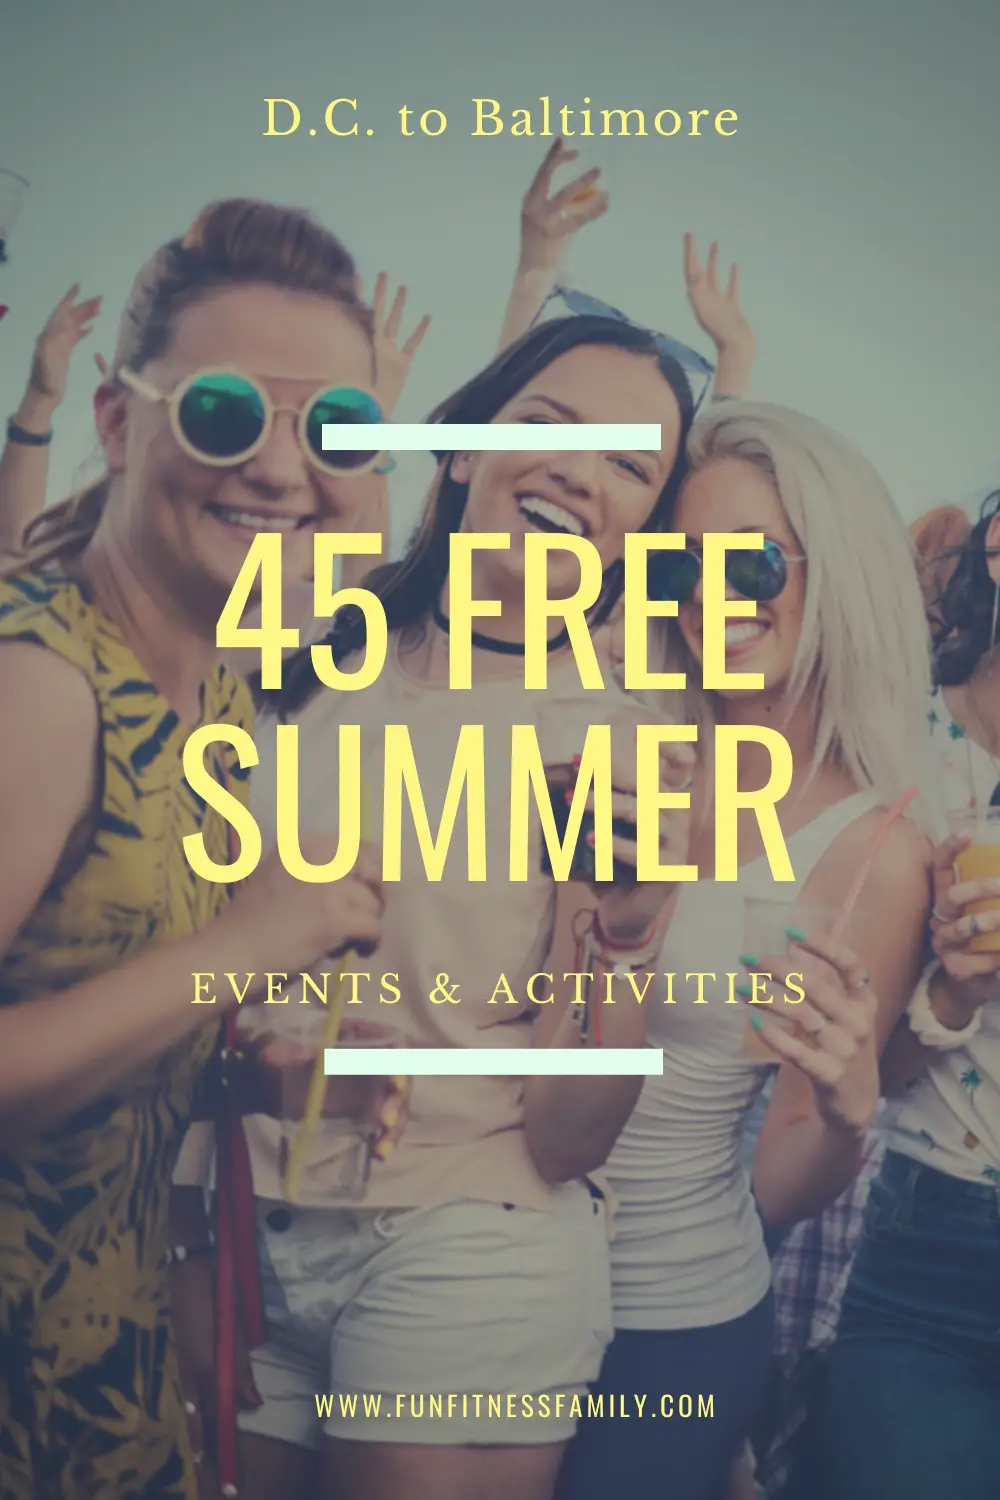 Baltimore and DC Summer Festivals and Free Events